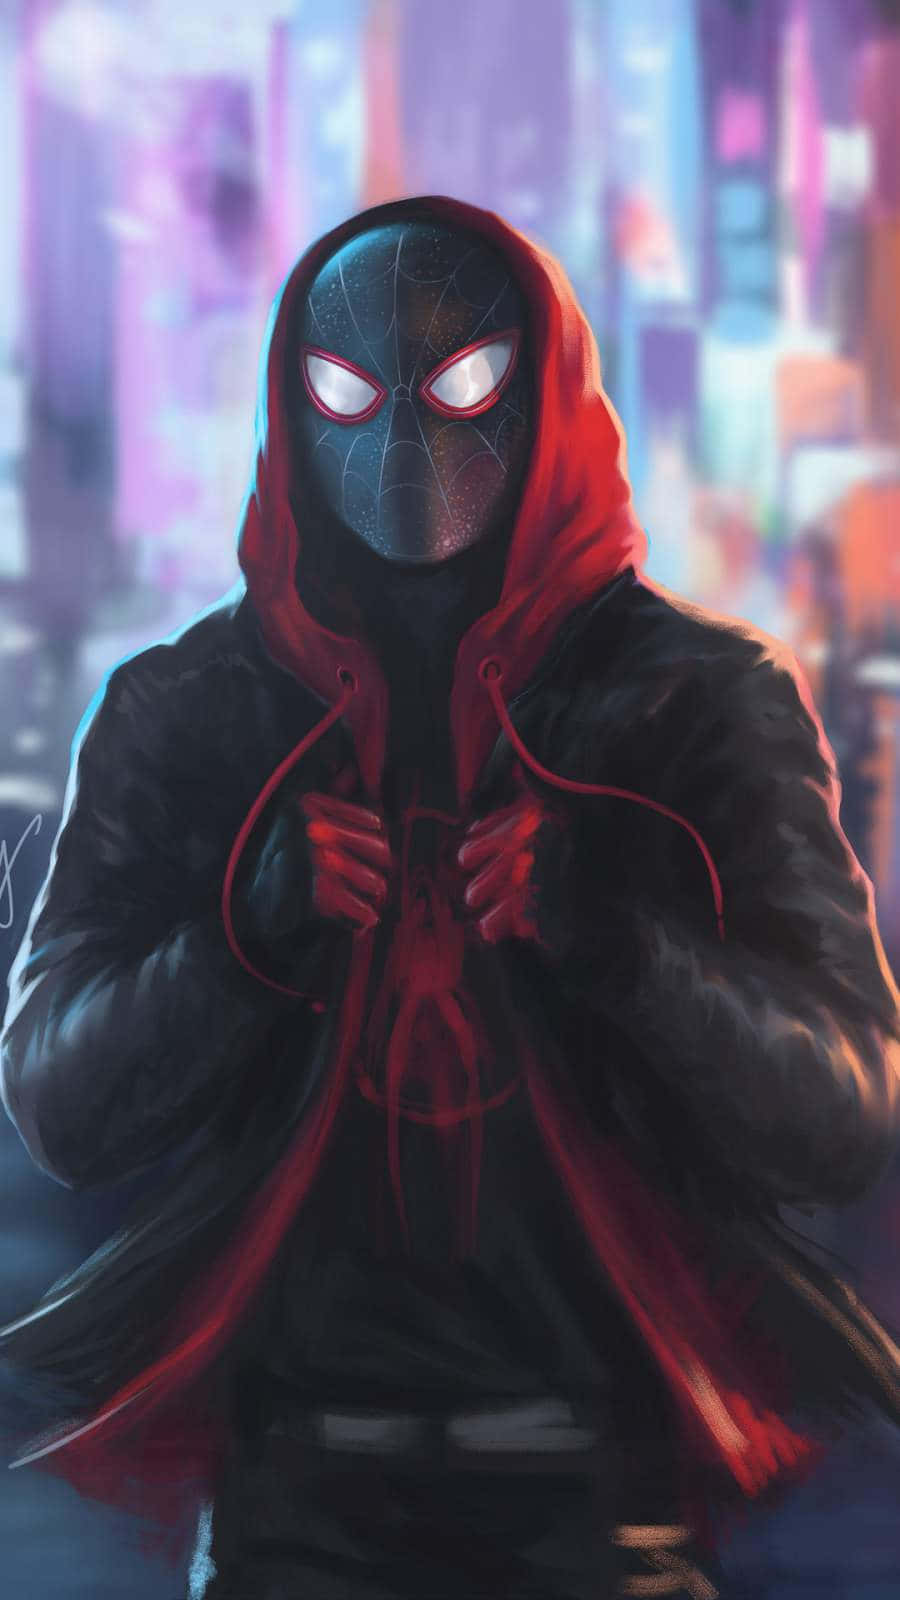 Thrilling Adventure With Miles Morales In The Spider-verse